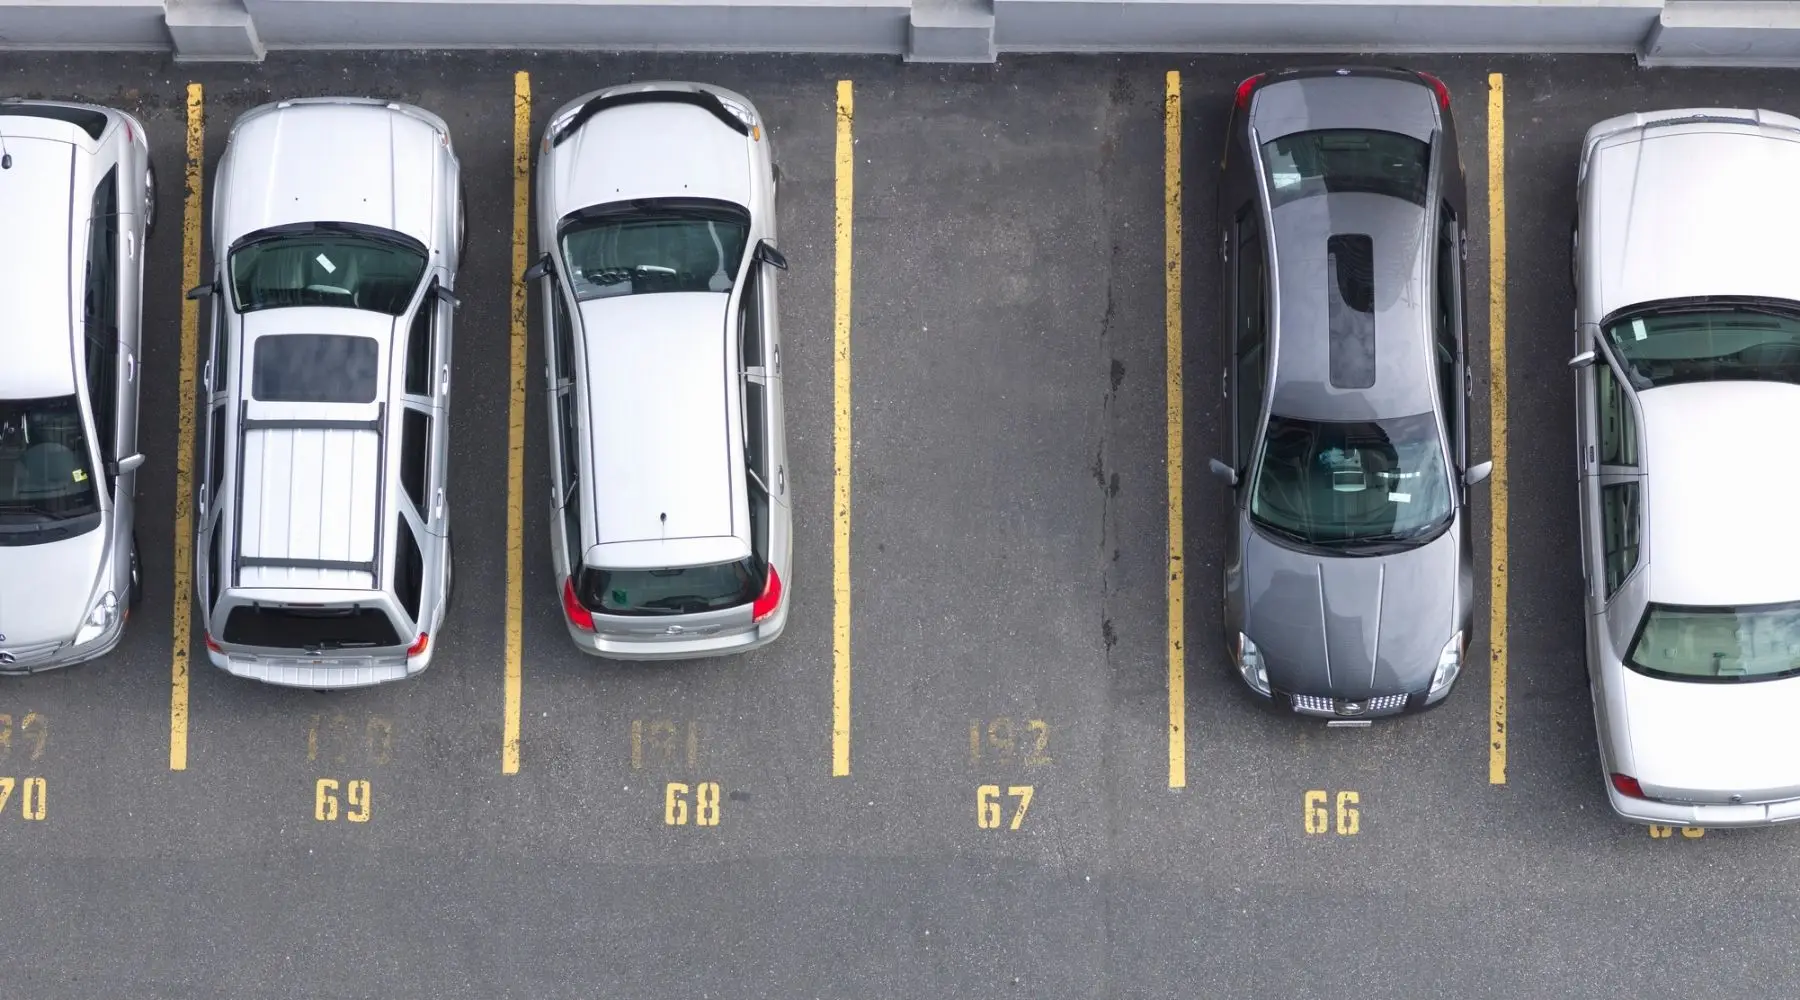 Cars are parked in a line, with one space remaining. 